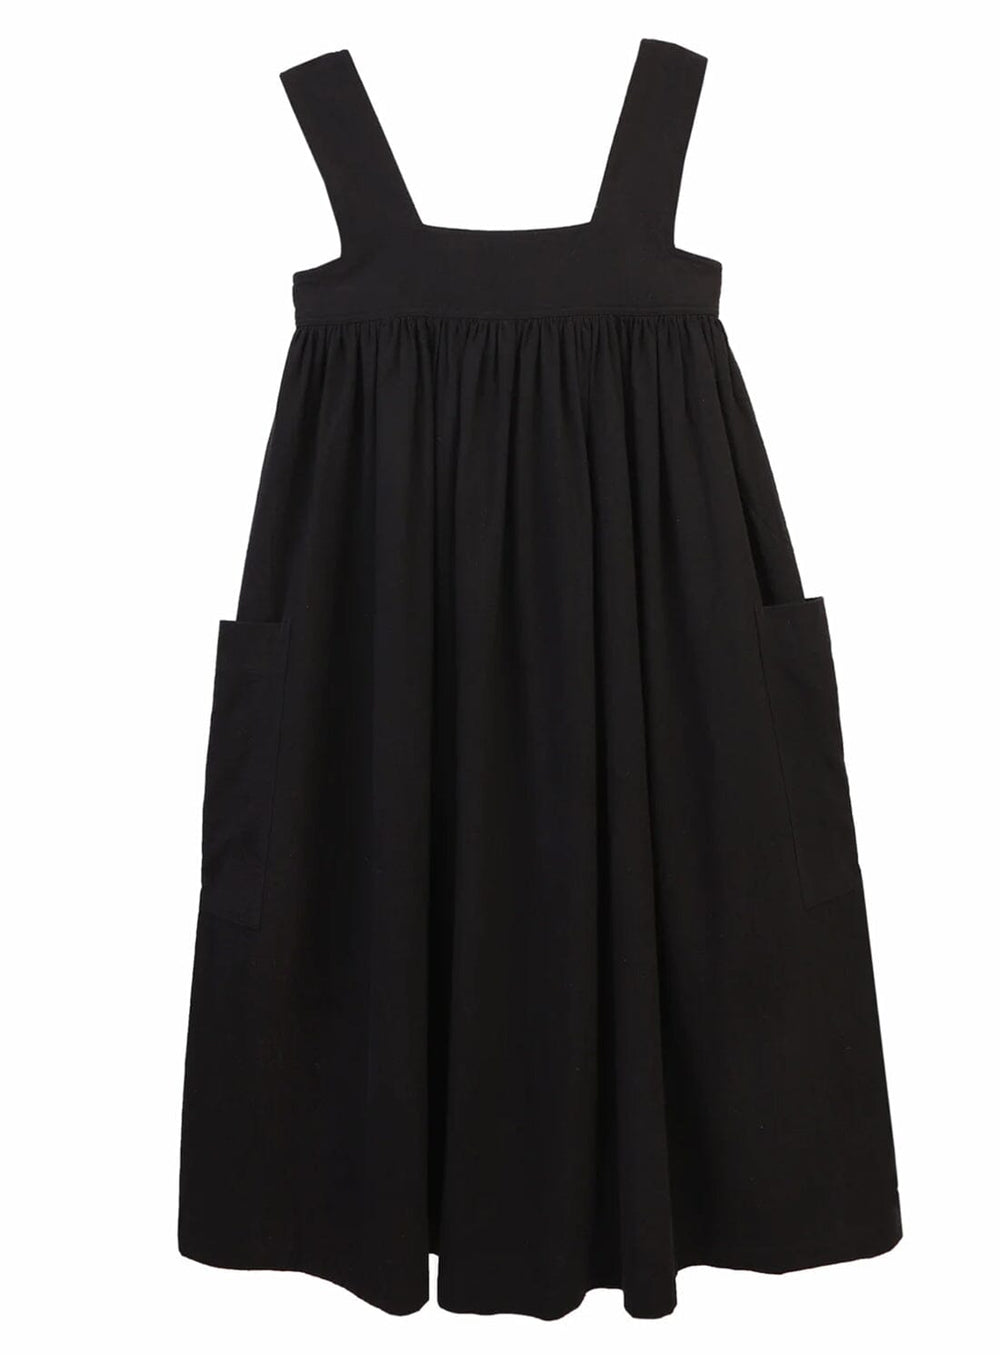 Cameron Dress in Black Dresses YBDFinds 